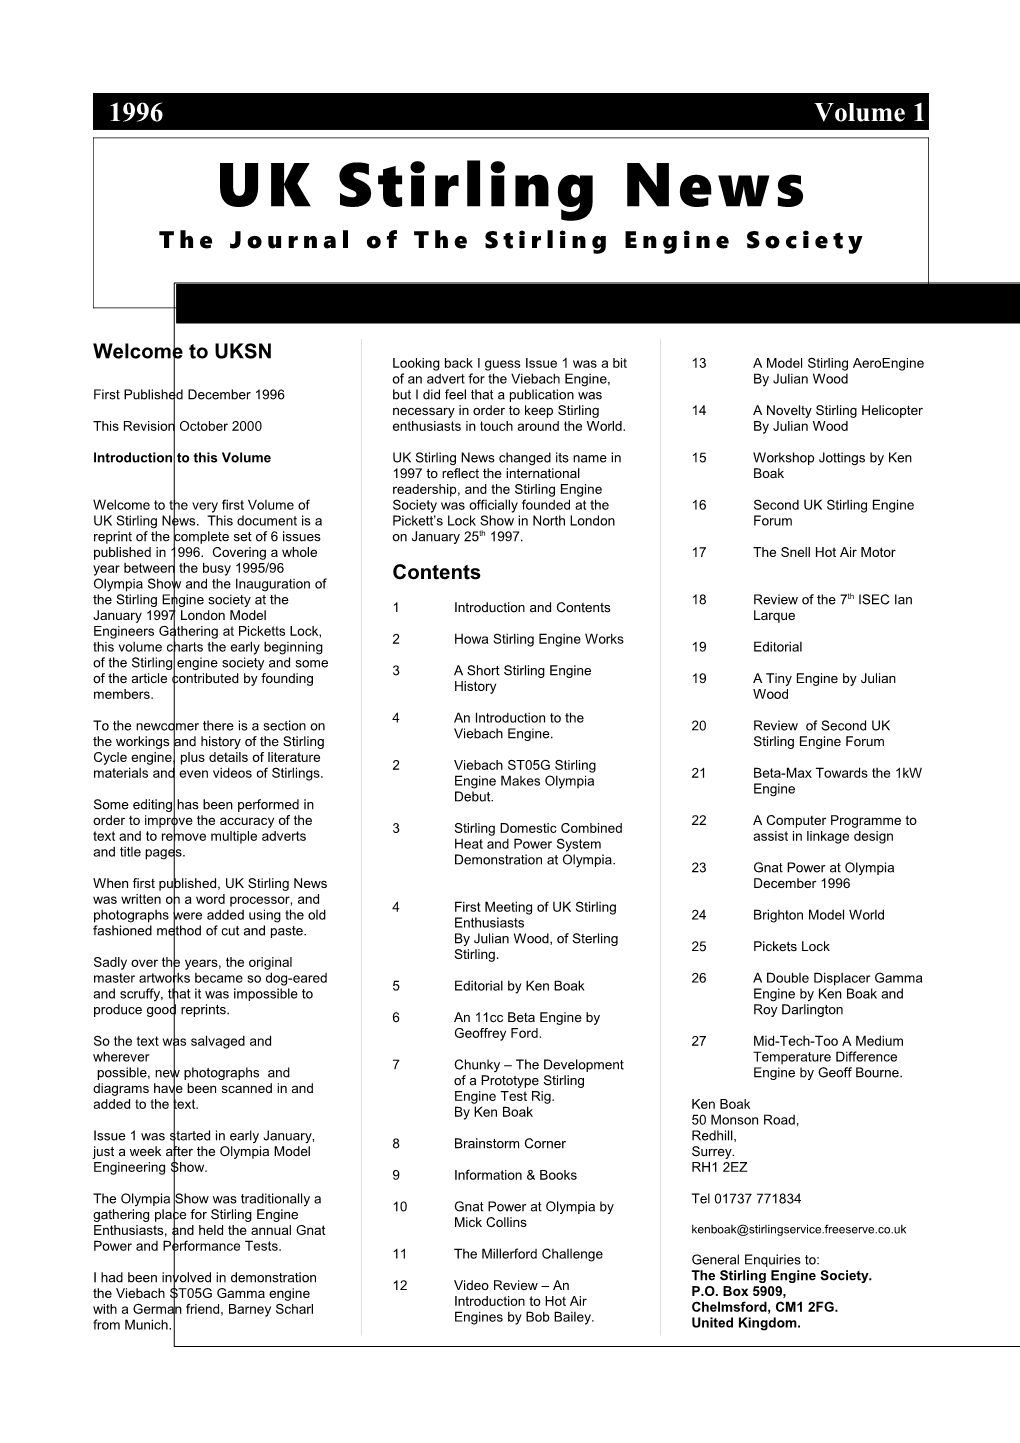 The Journal of the Stirling Engine Society